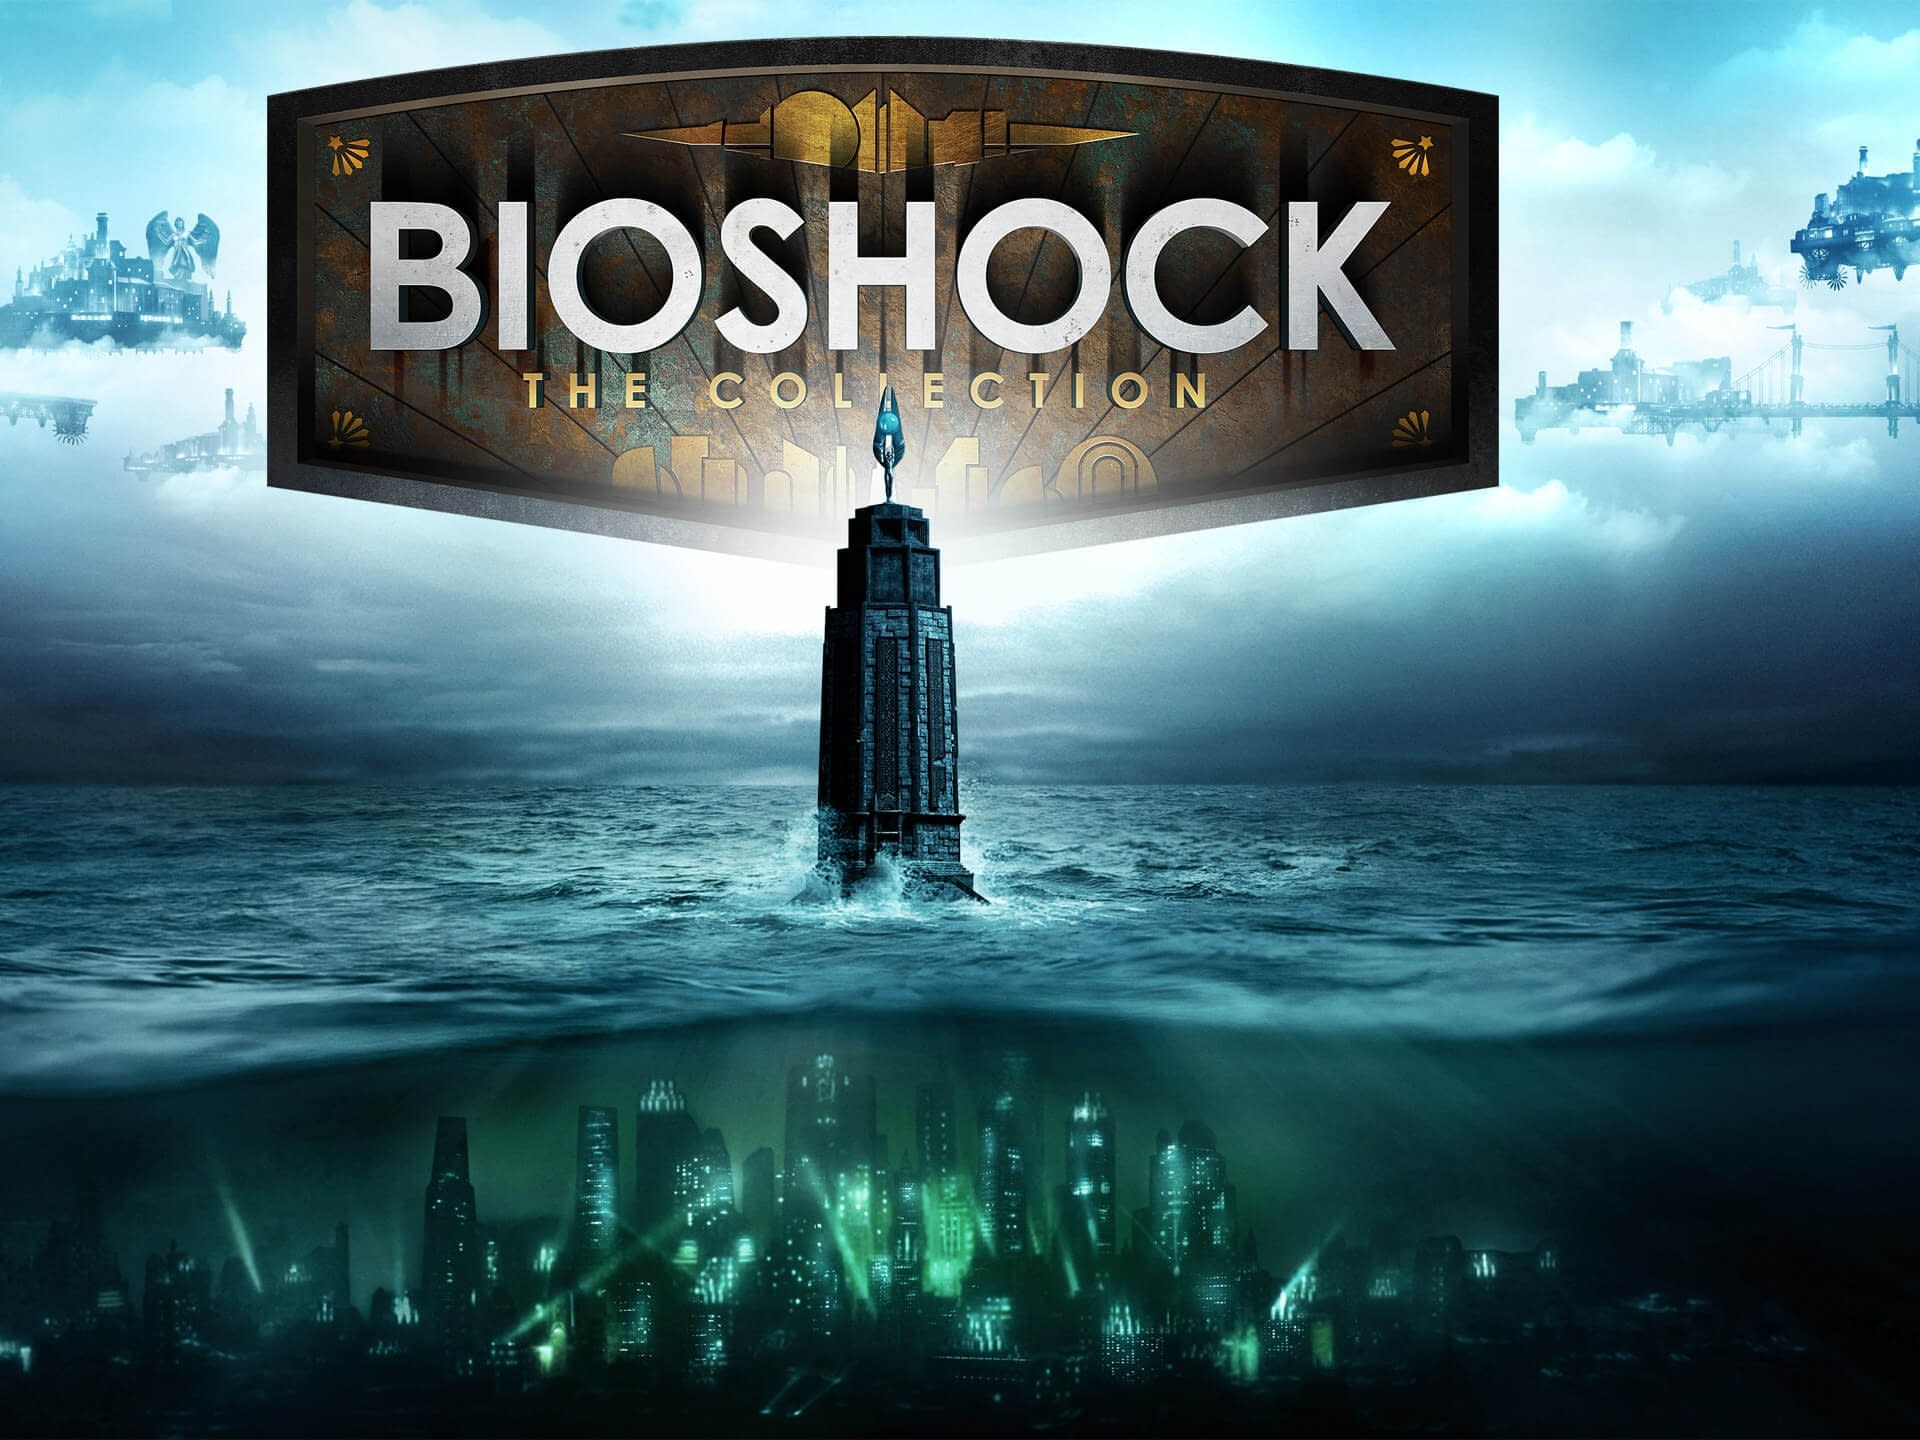 Bioshock: Amazing Price in The Collection Steam: Cheap from Chips!